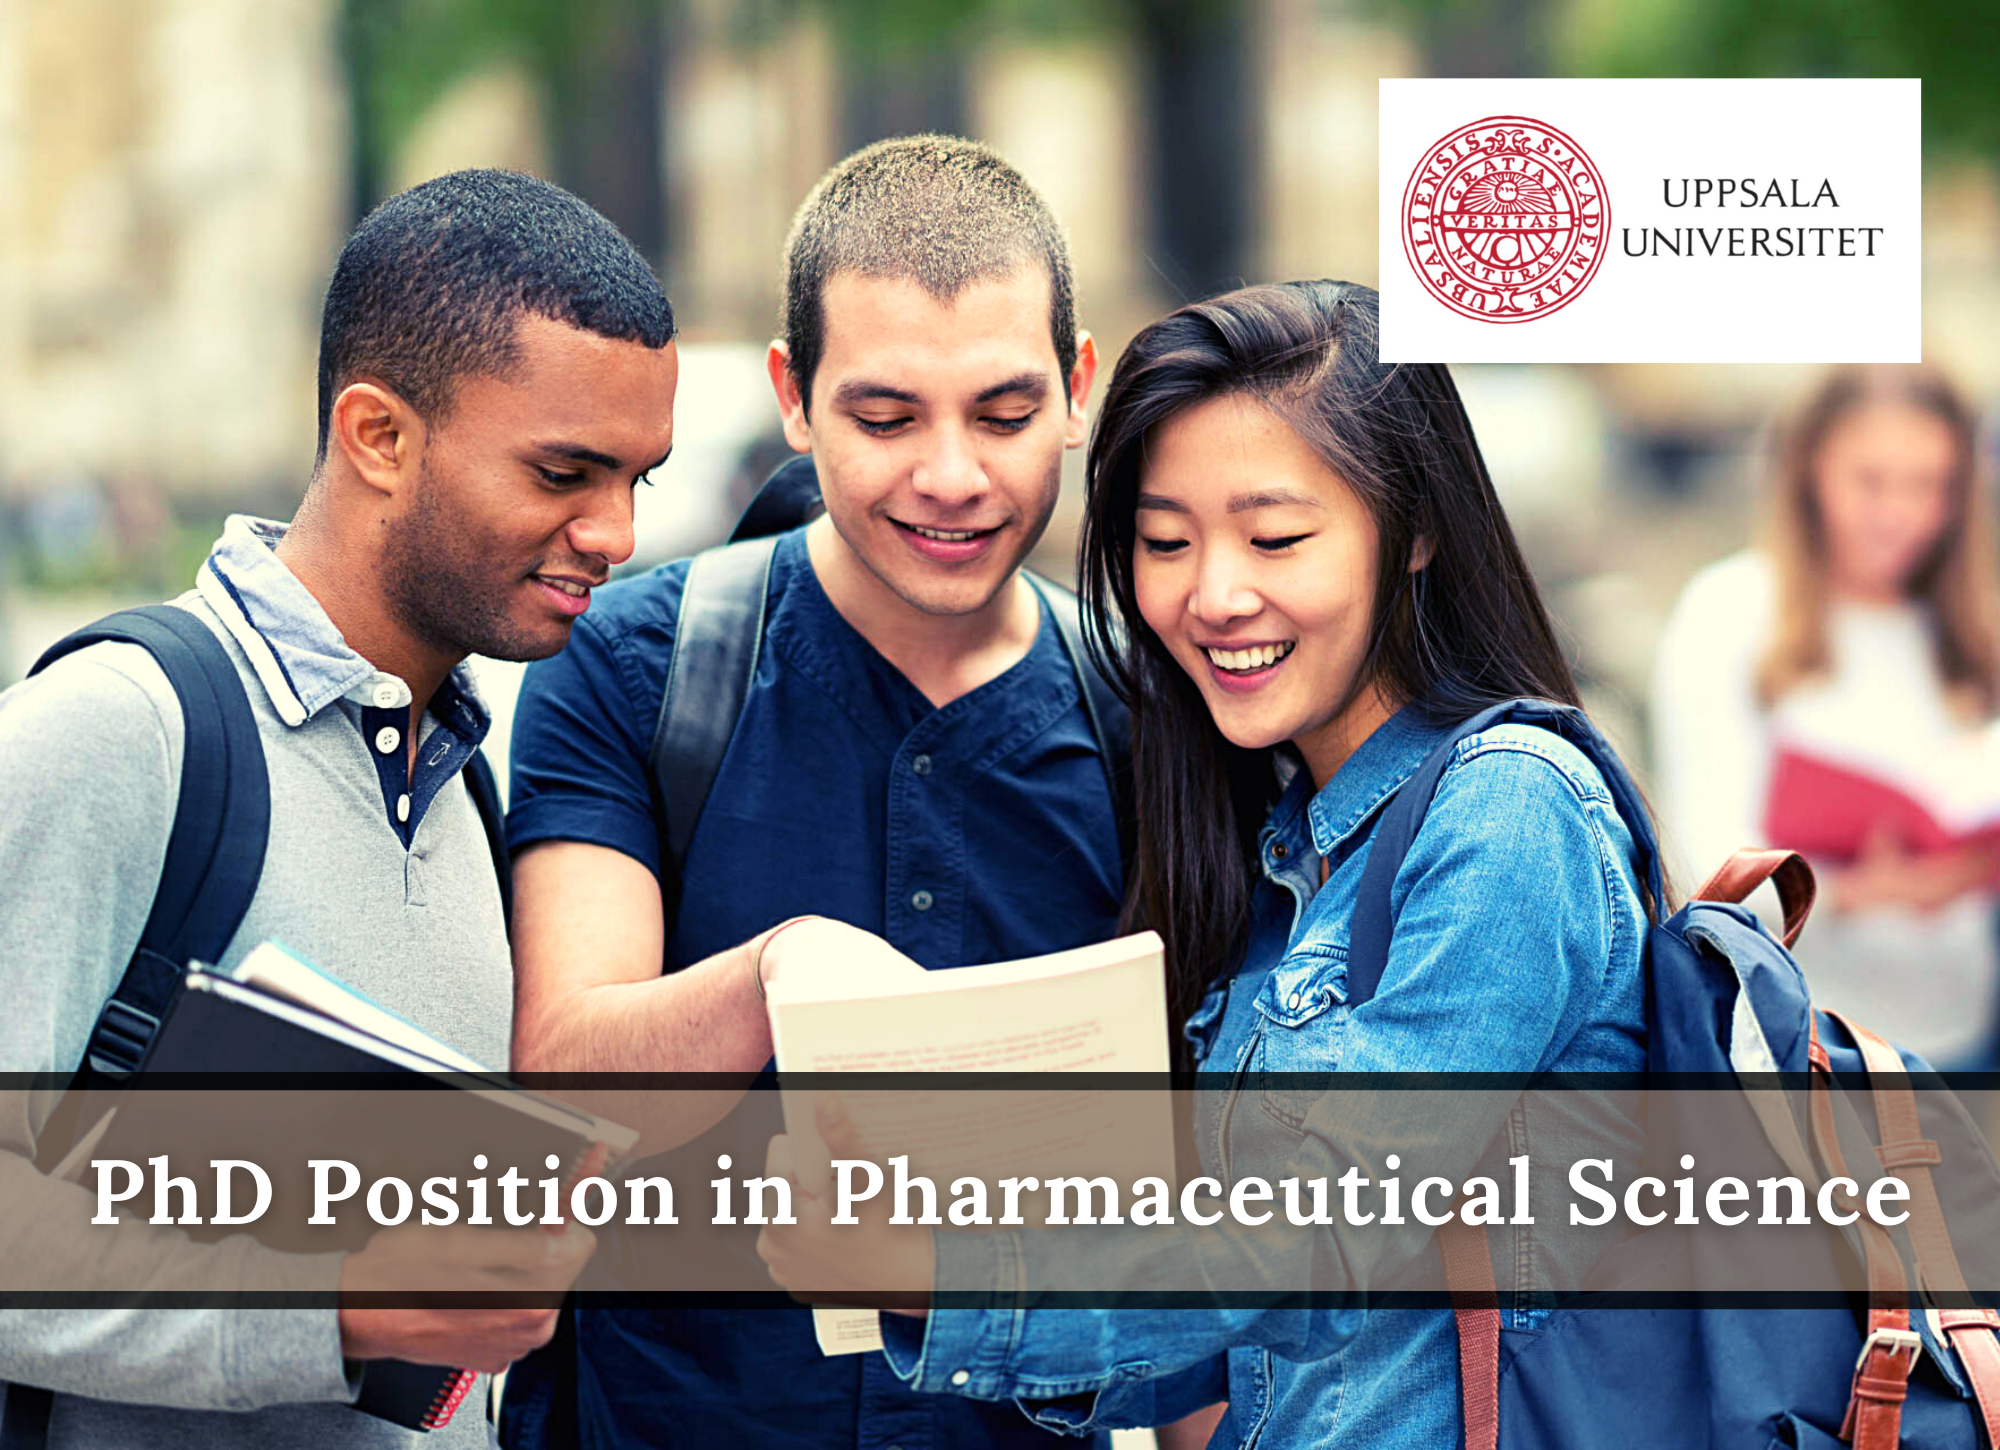 PhD Position in Pharmaceutical Science at Uppsala University